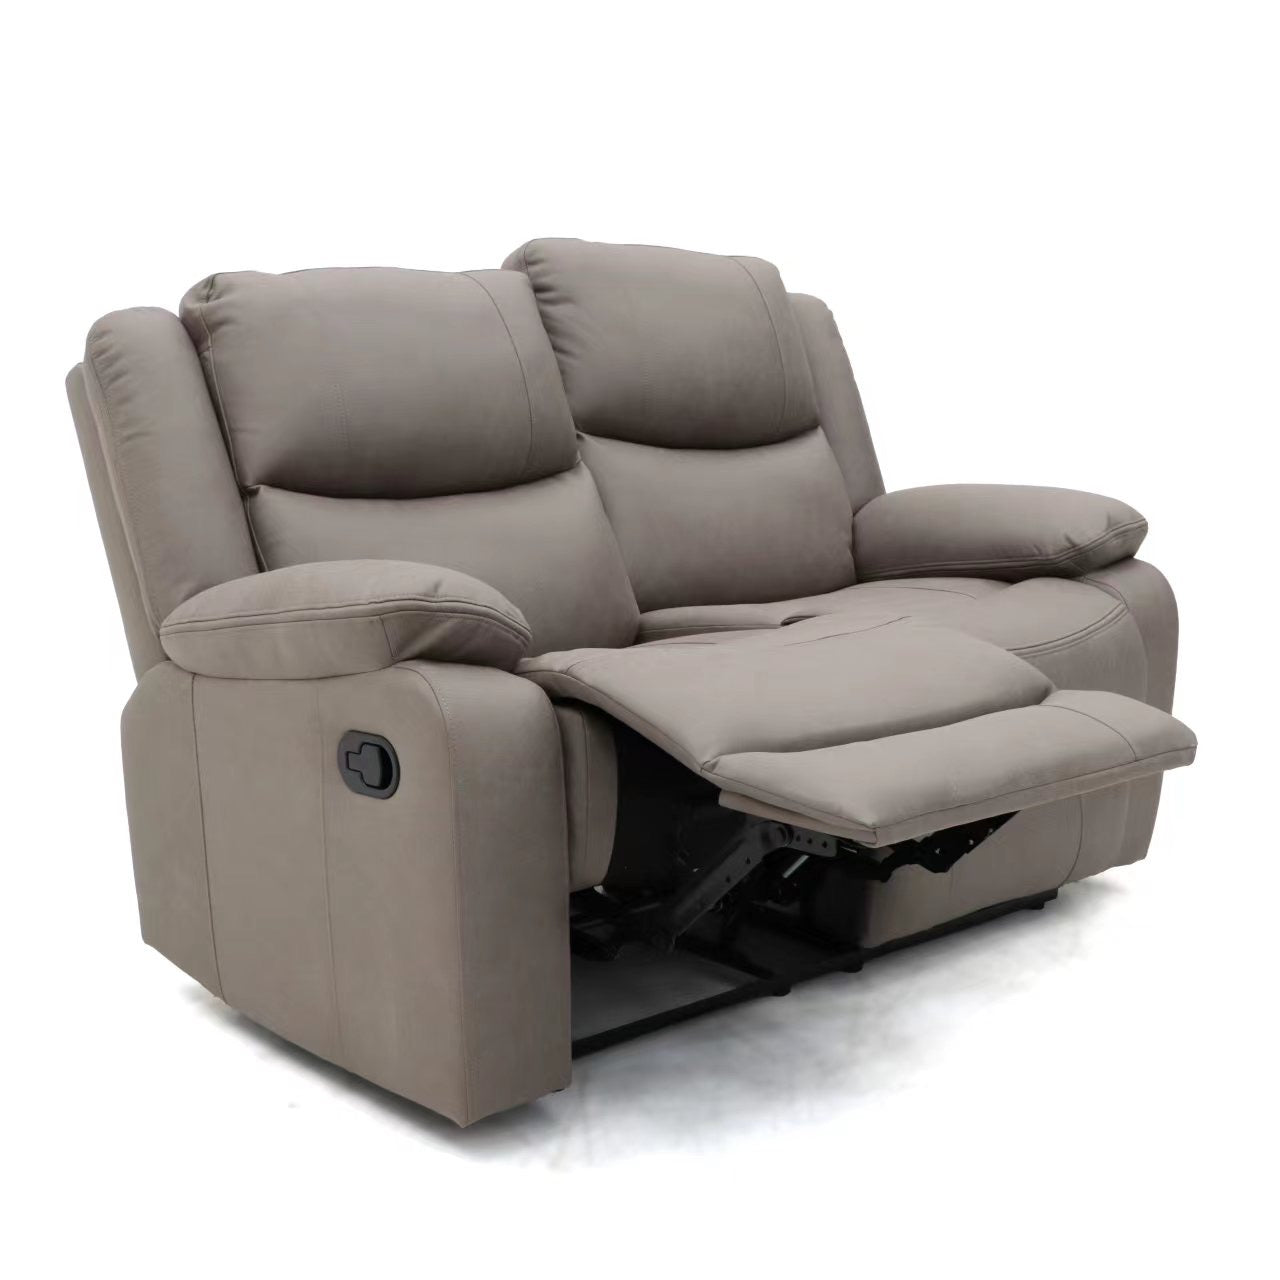 Zoe 3 Seater and 2 Seater Manual Recliner Mink Fabric